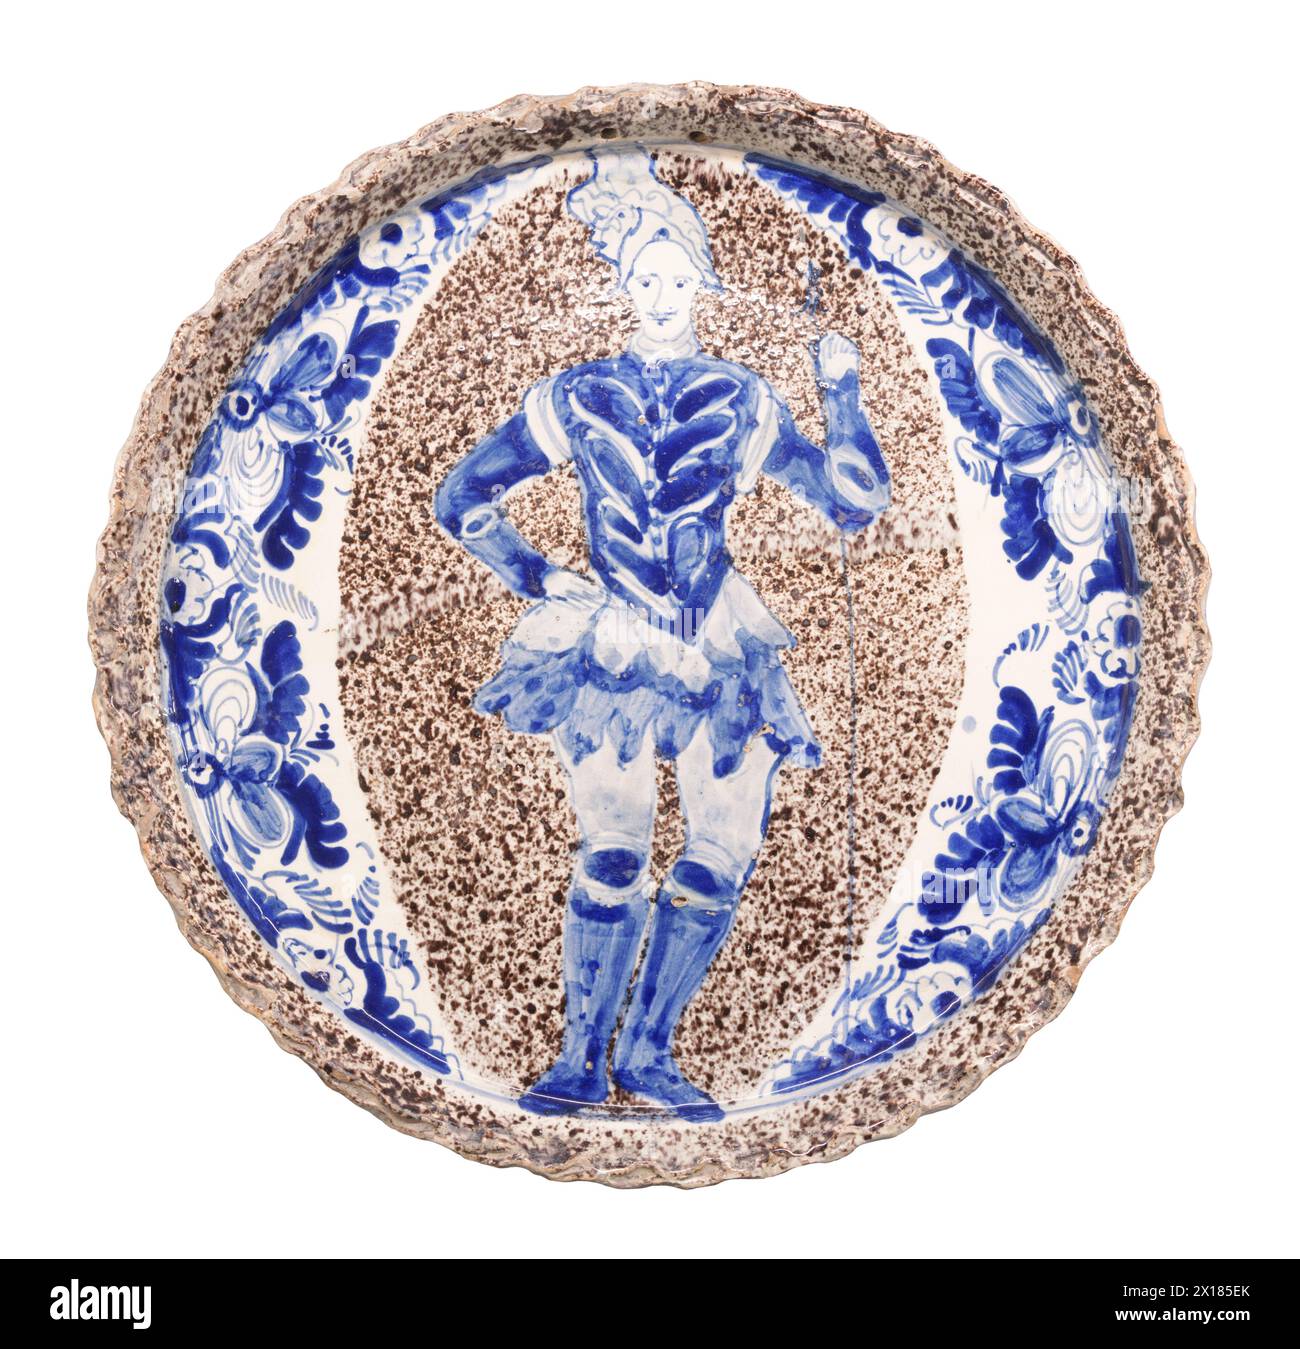 Maiolica plate with flower decoration and man. Padova, Italy Stock Photo